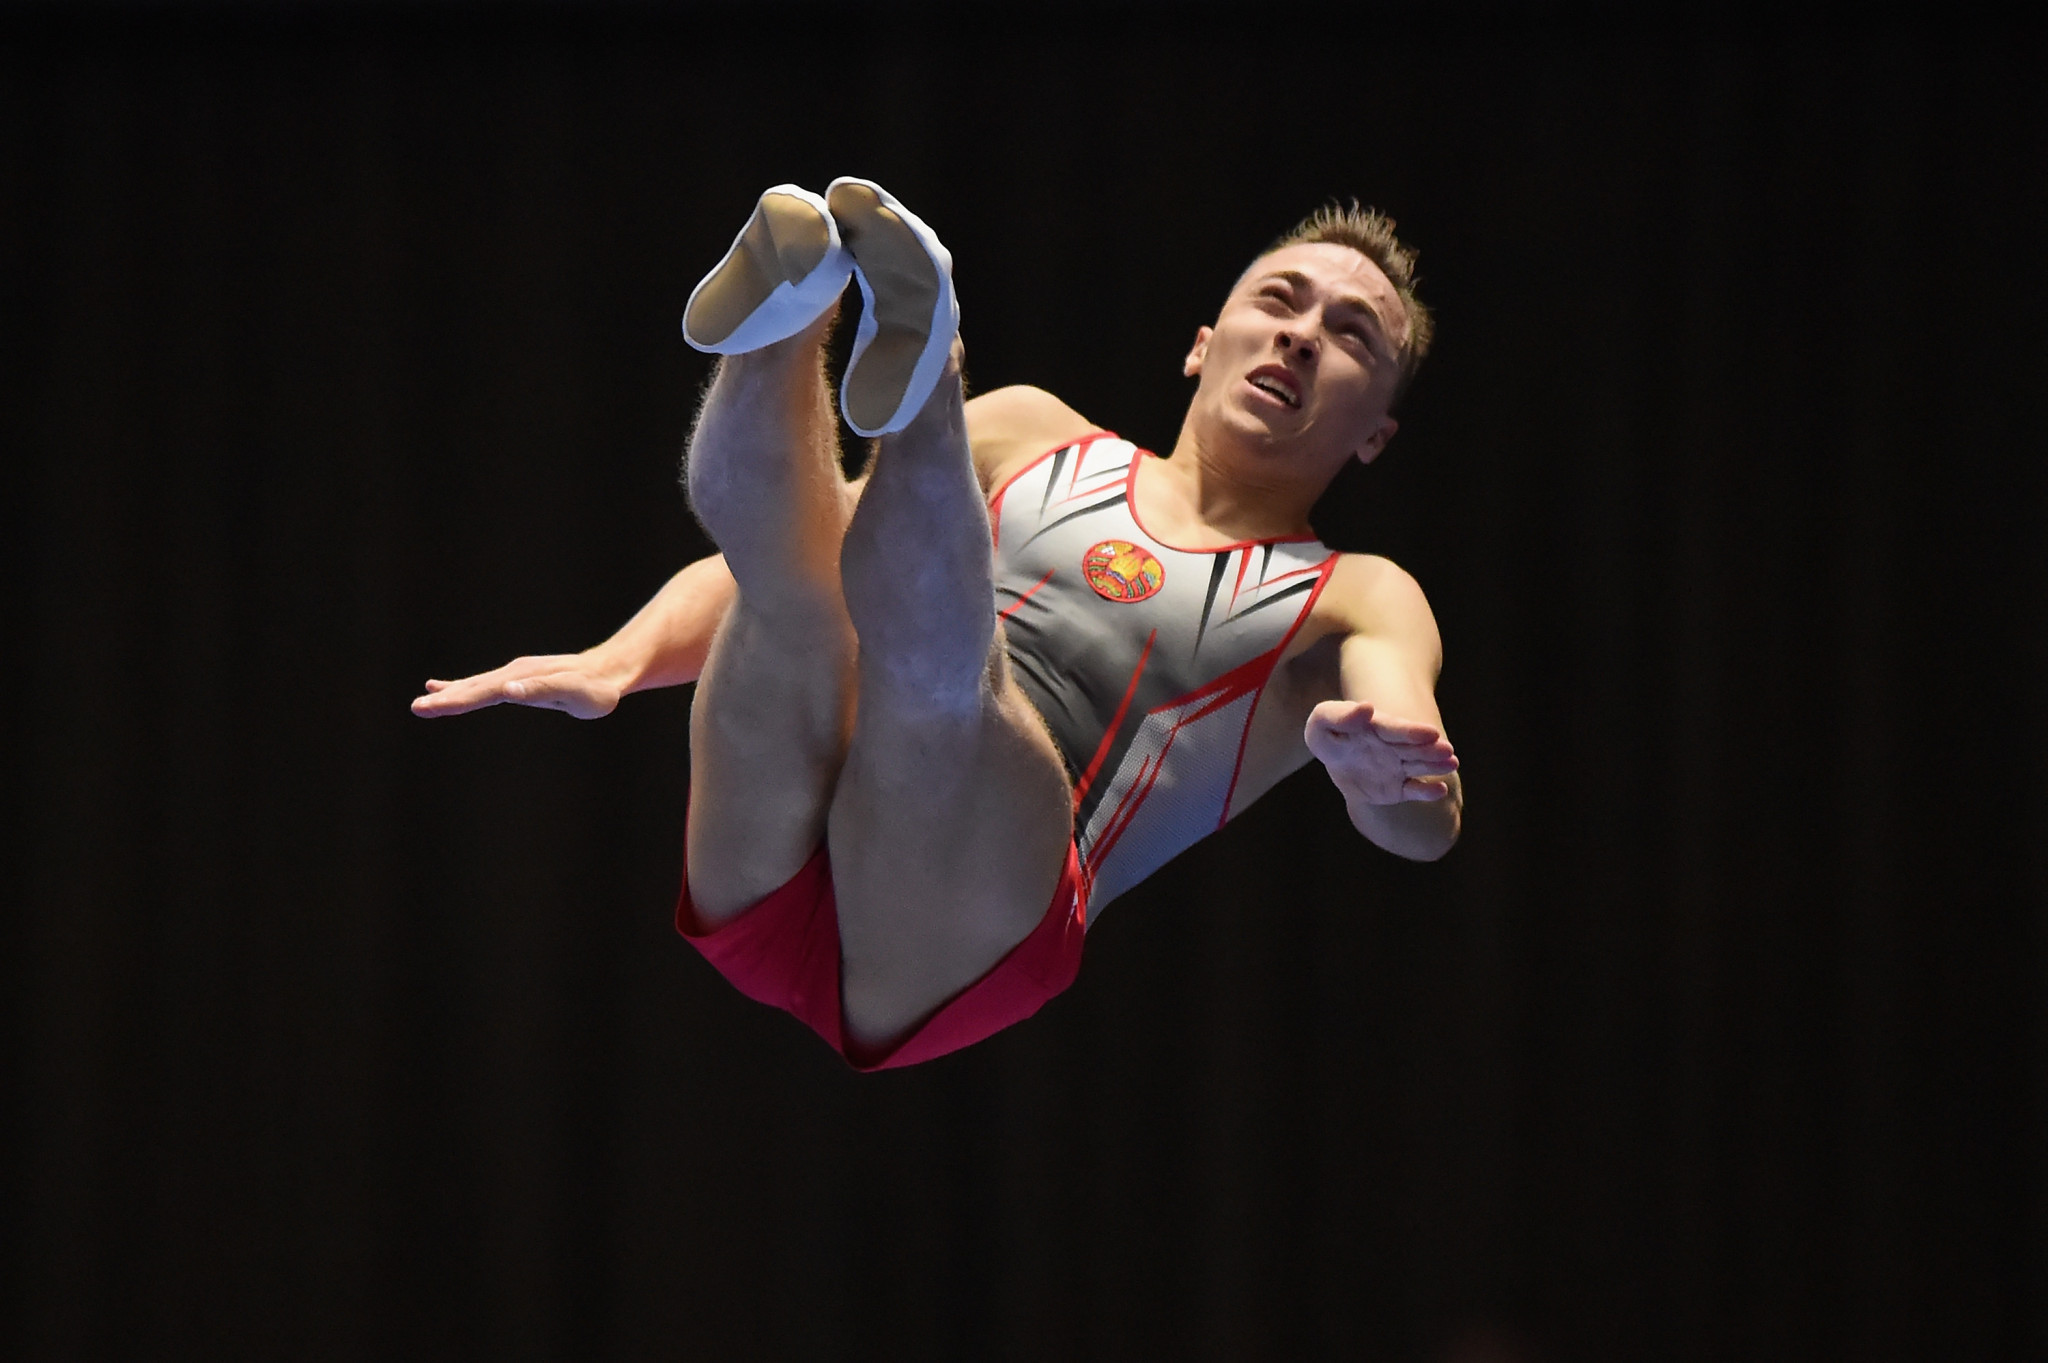 Belarus and Japan earn shock victories at FIG Trampoline World Championships